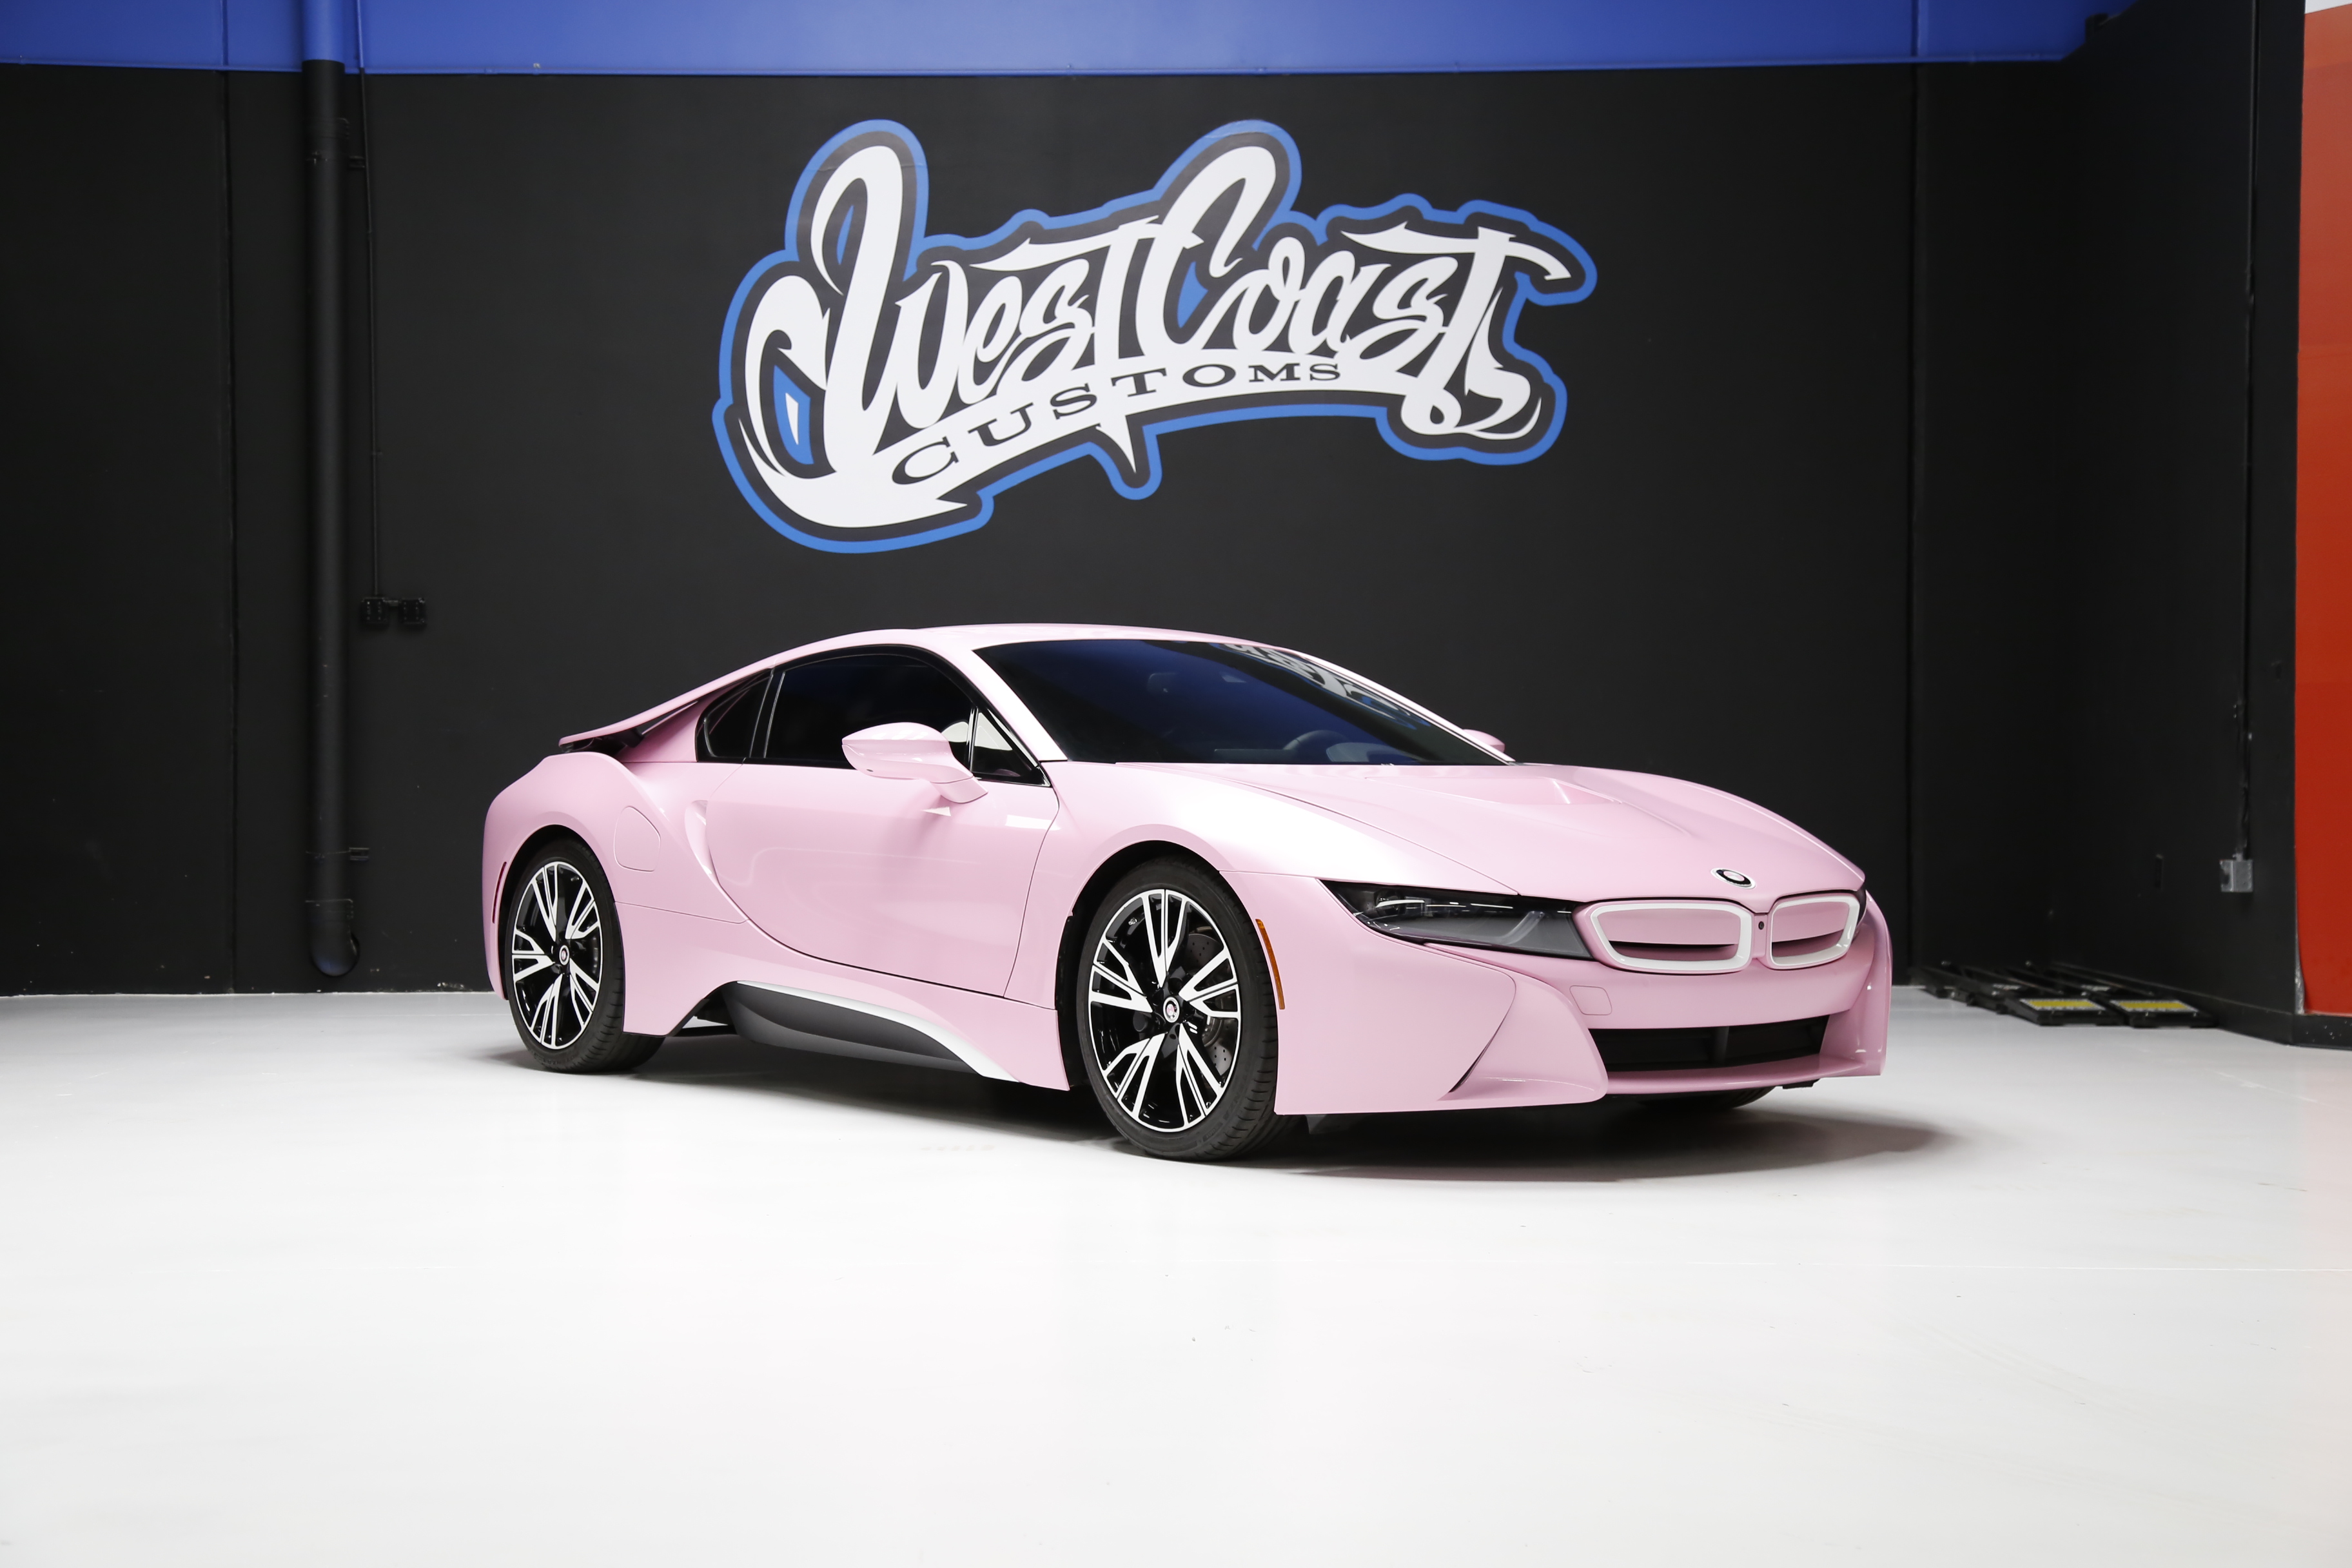 Manhattan loyalitet Udholdenhed West Coast Customs: Where A-listers go for crazy car designs - CNN Style